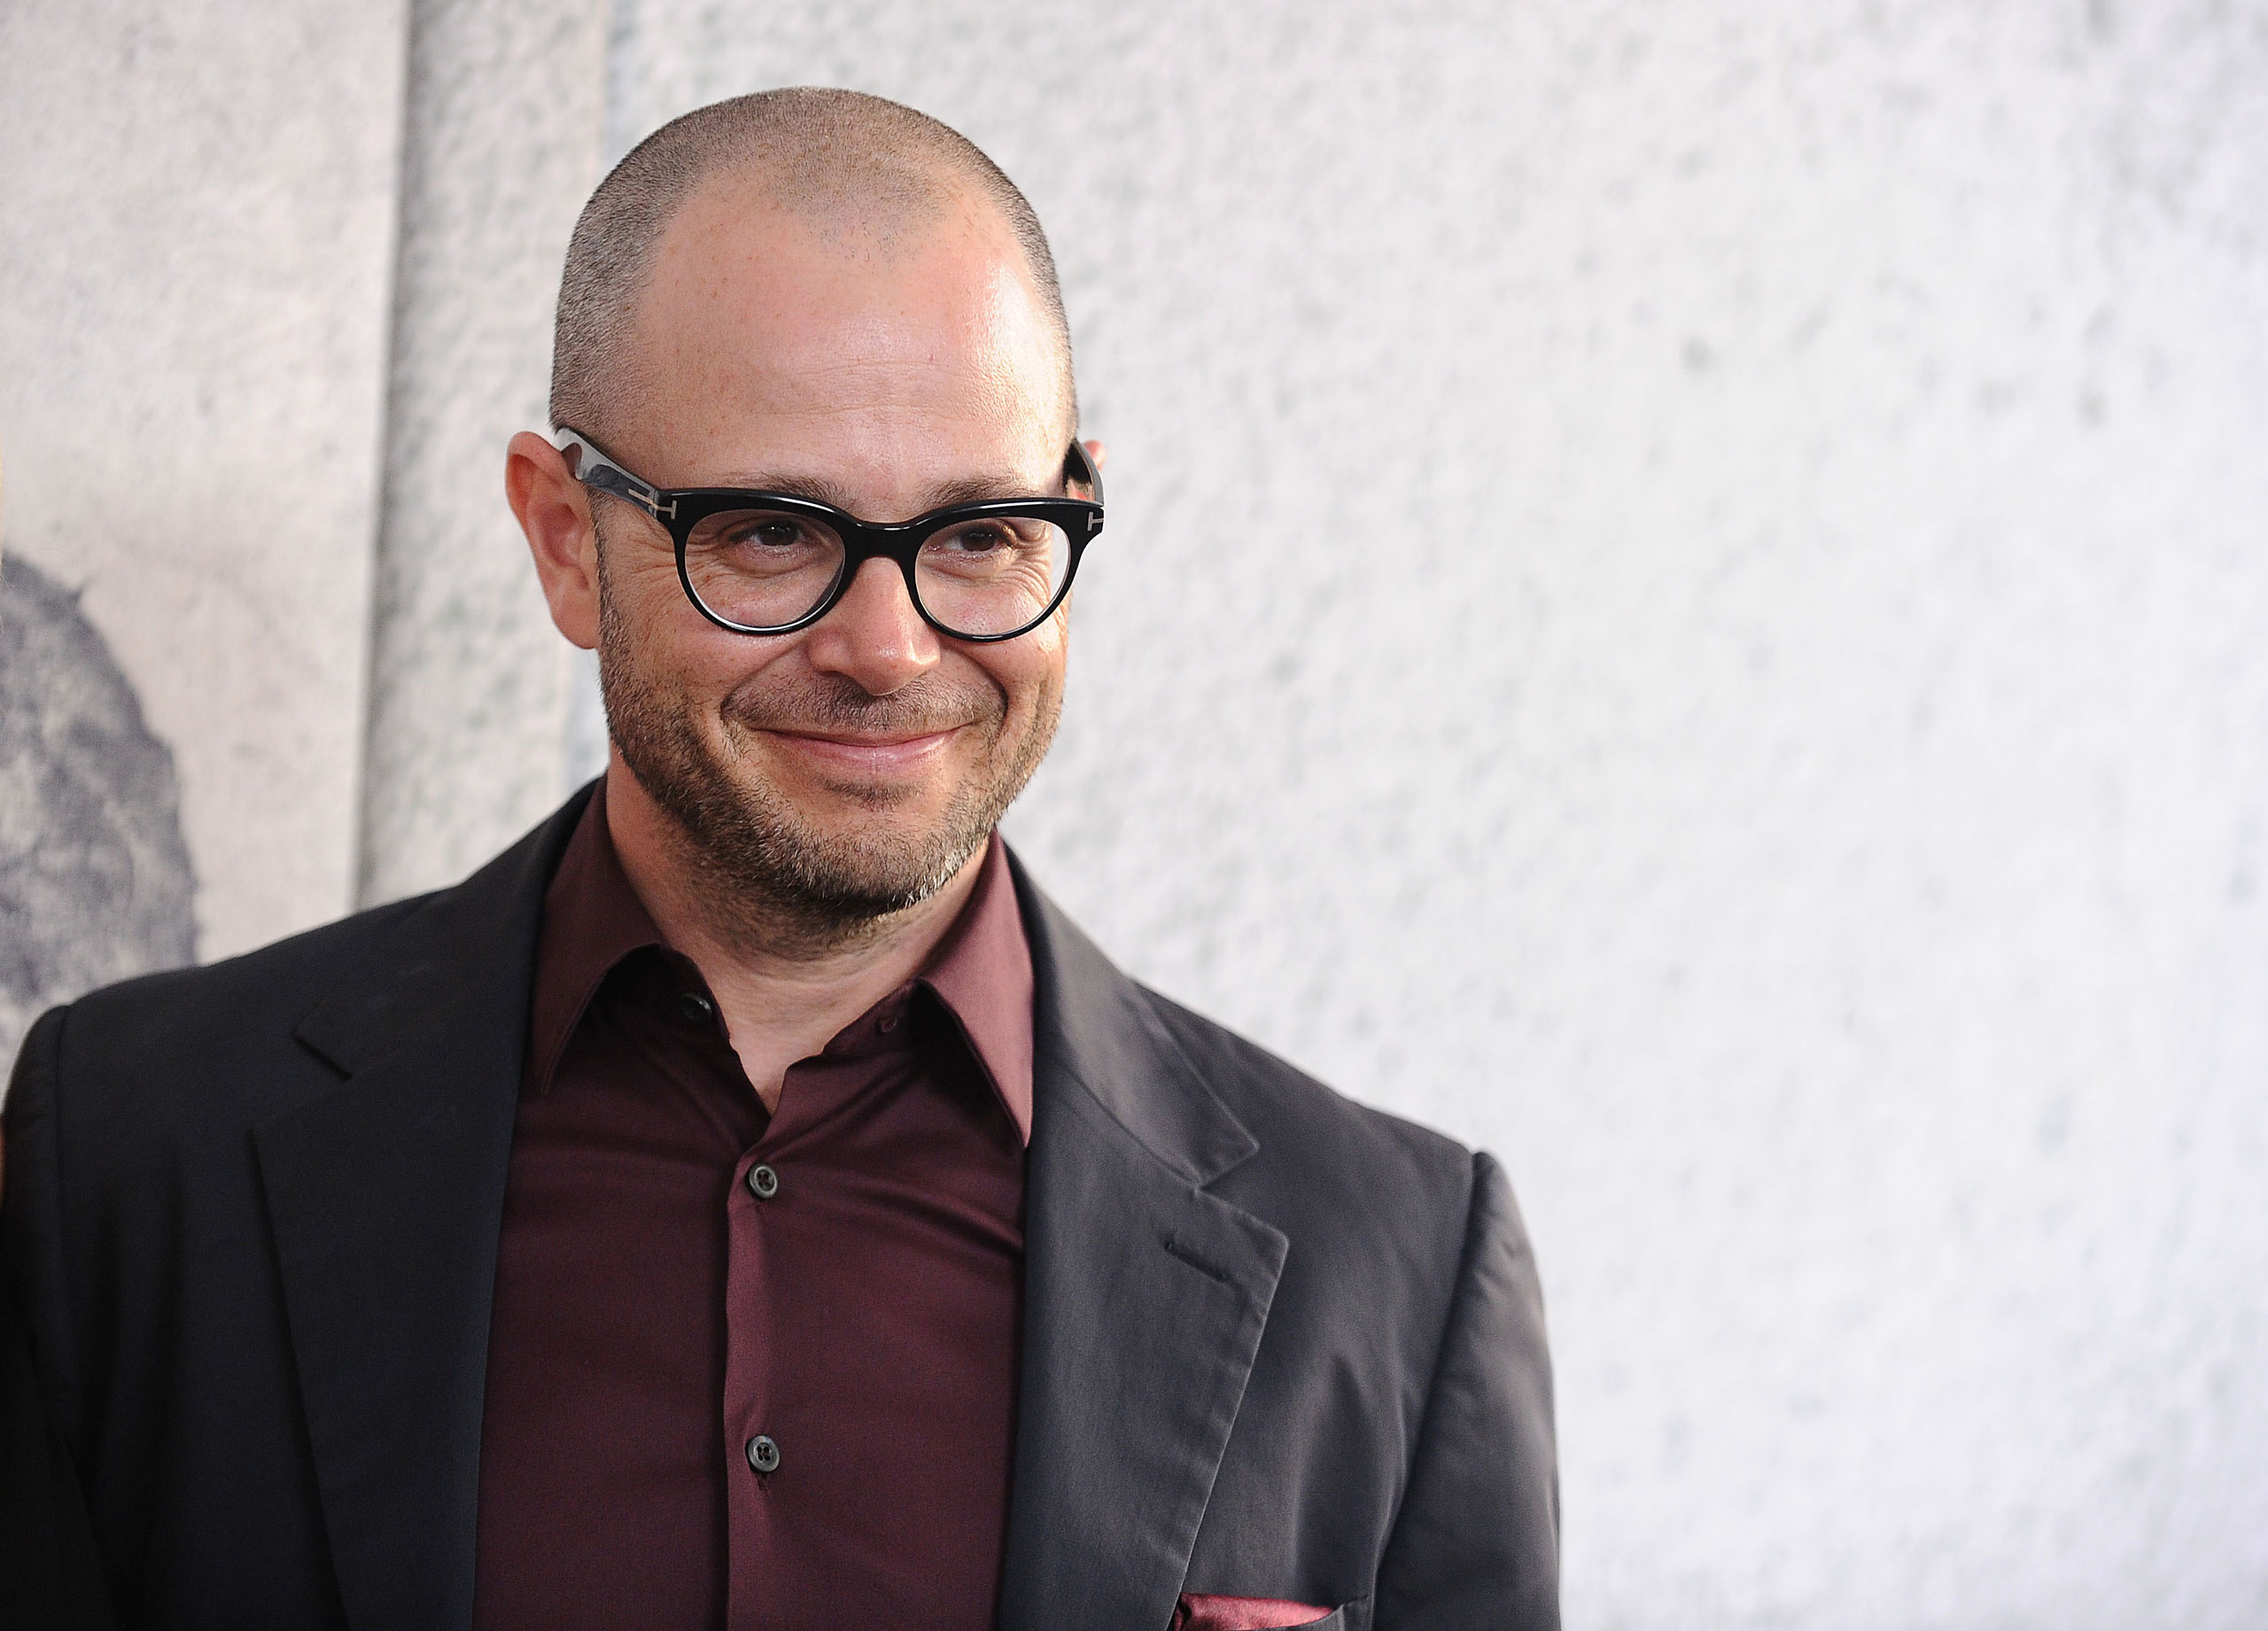 Producer Damon Lindelof attends the season 3 premiere of 'The Leftovers' at Avalon Hollywood on April 4, 2017 in Los Angeles. (Jason LaVeris—FilmMagic/Getty Images)